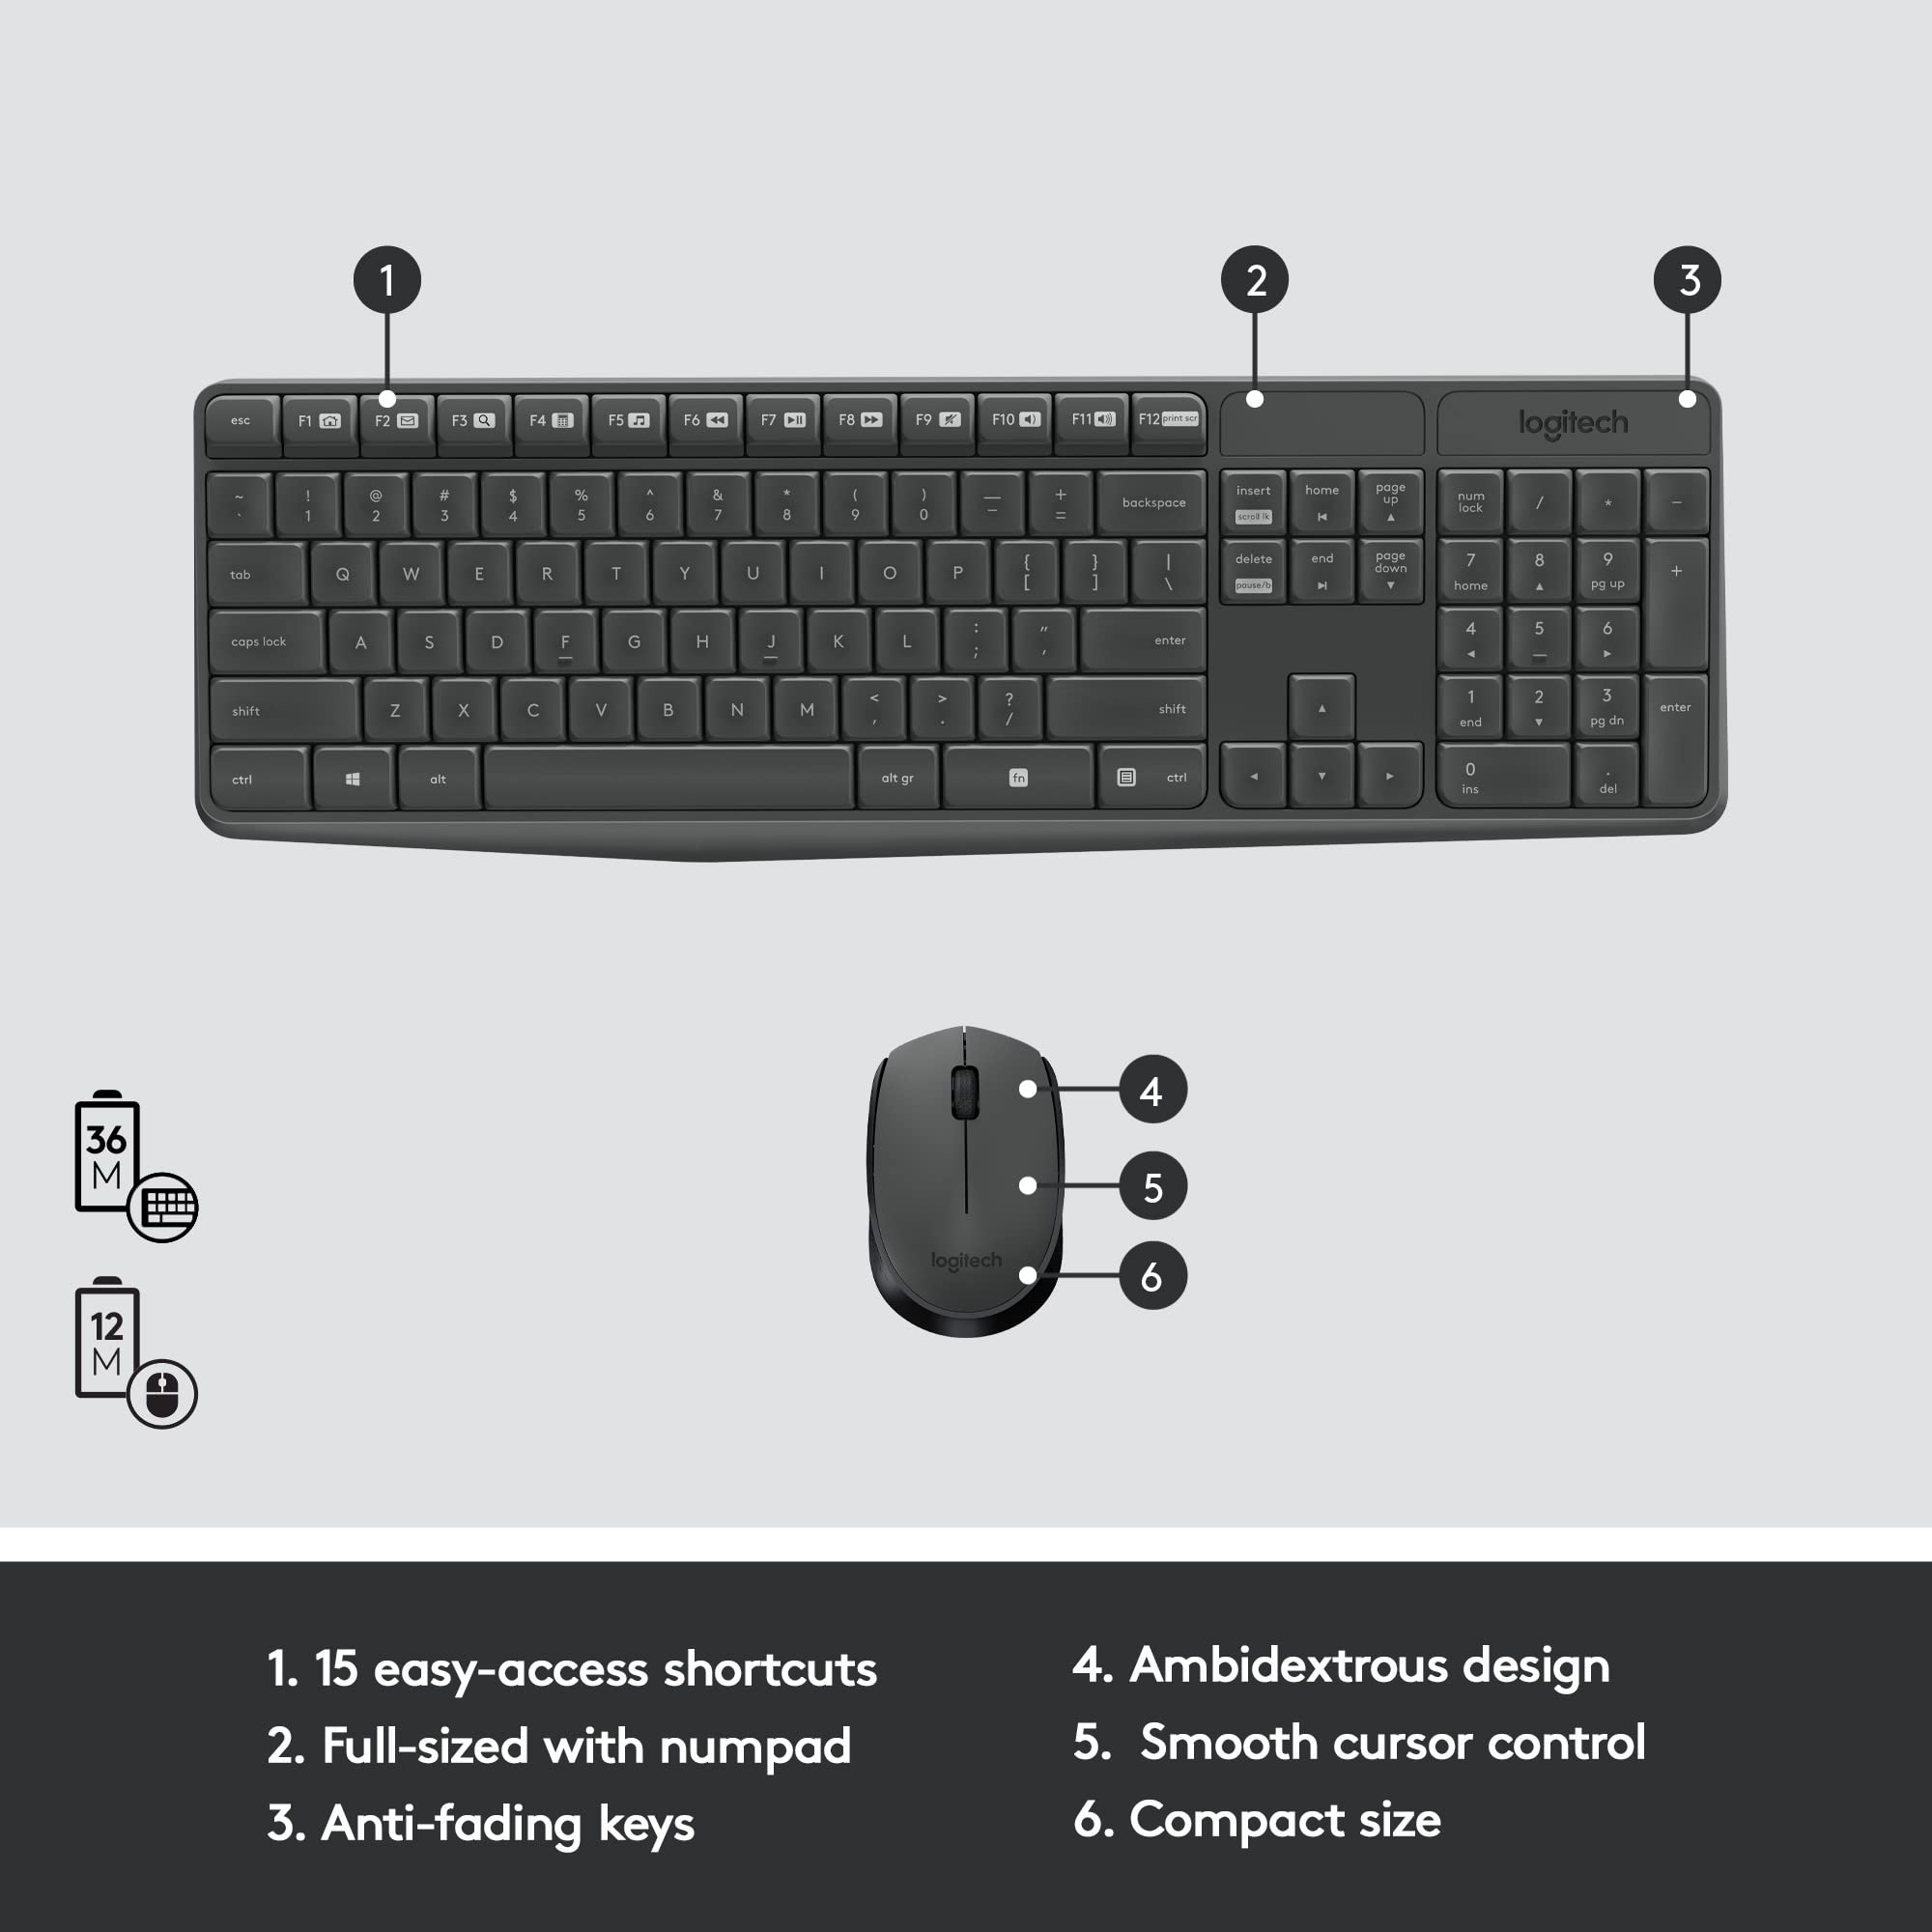 Logitech MK235 Wireless Keyboard and Mouse Combo for Windows, USB Receiver, 15 FN Keys, Long Battery Life, Compatible with PC, Laptop